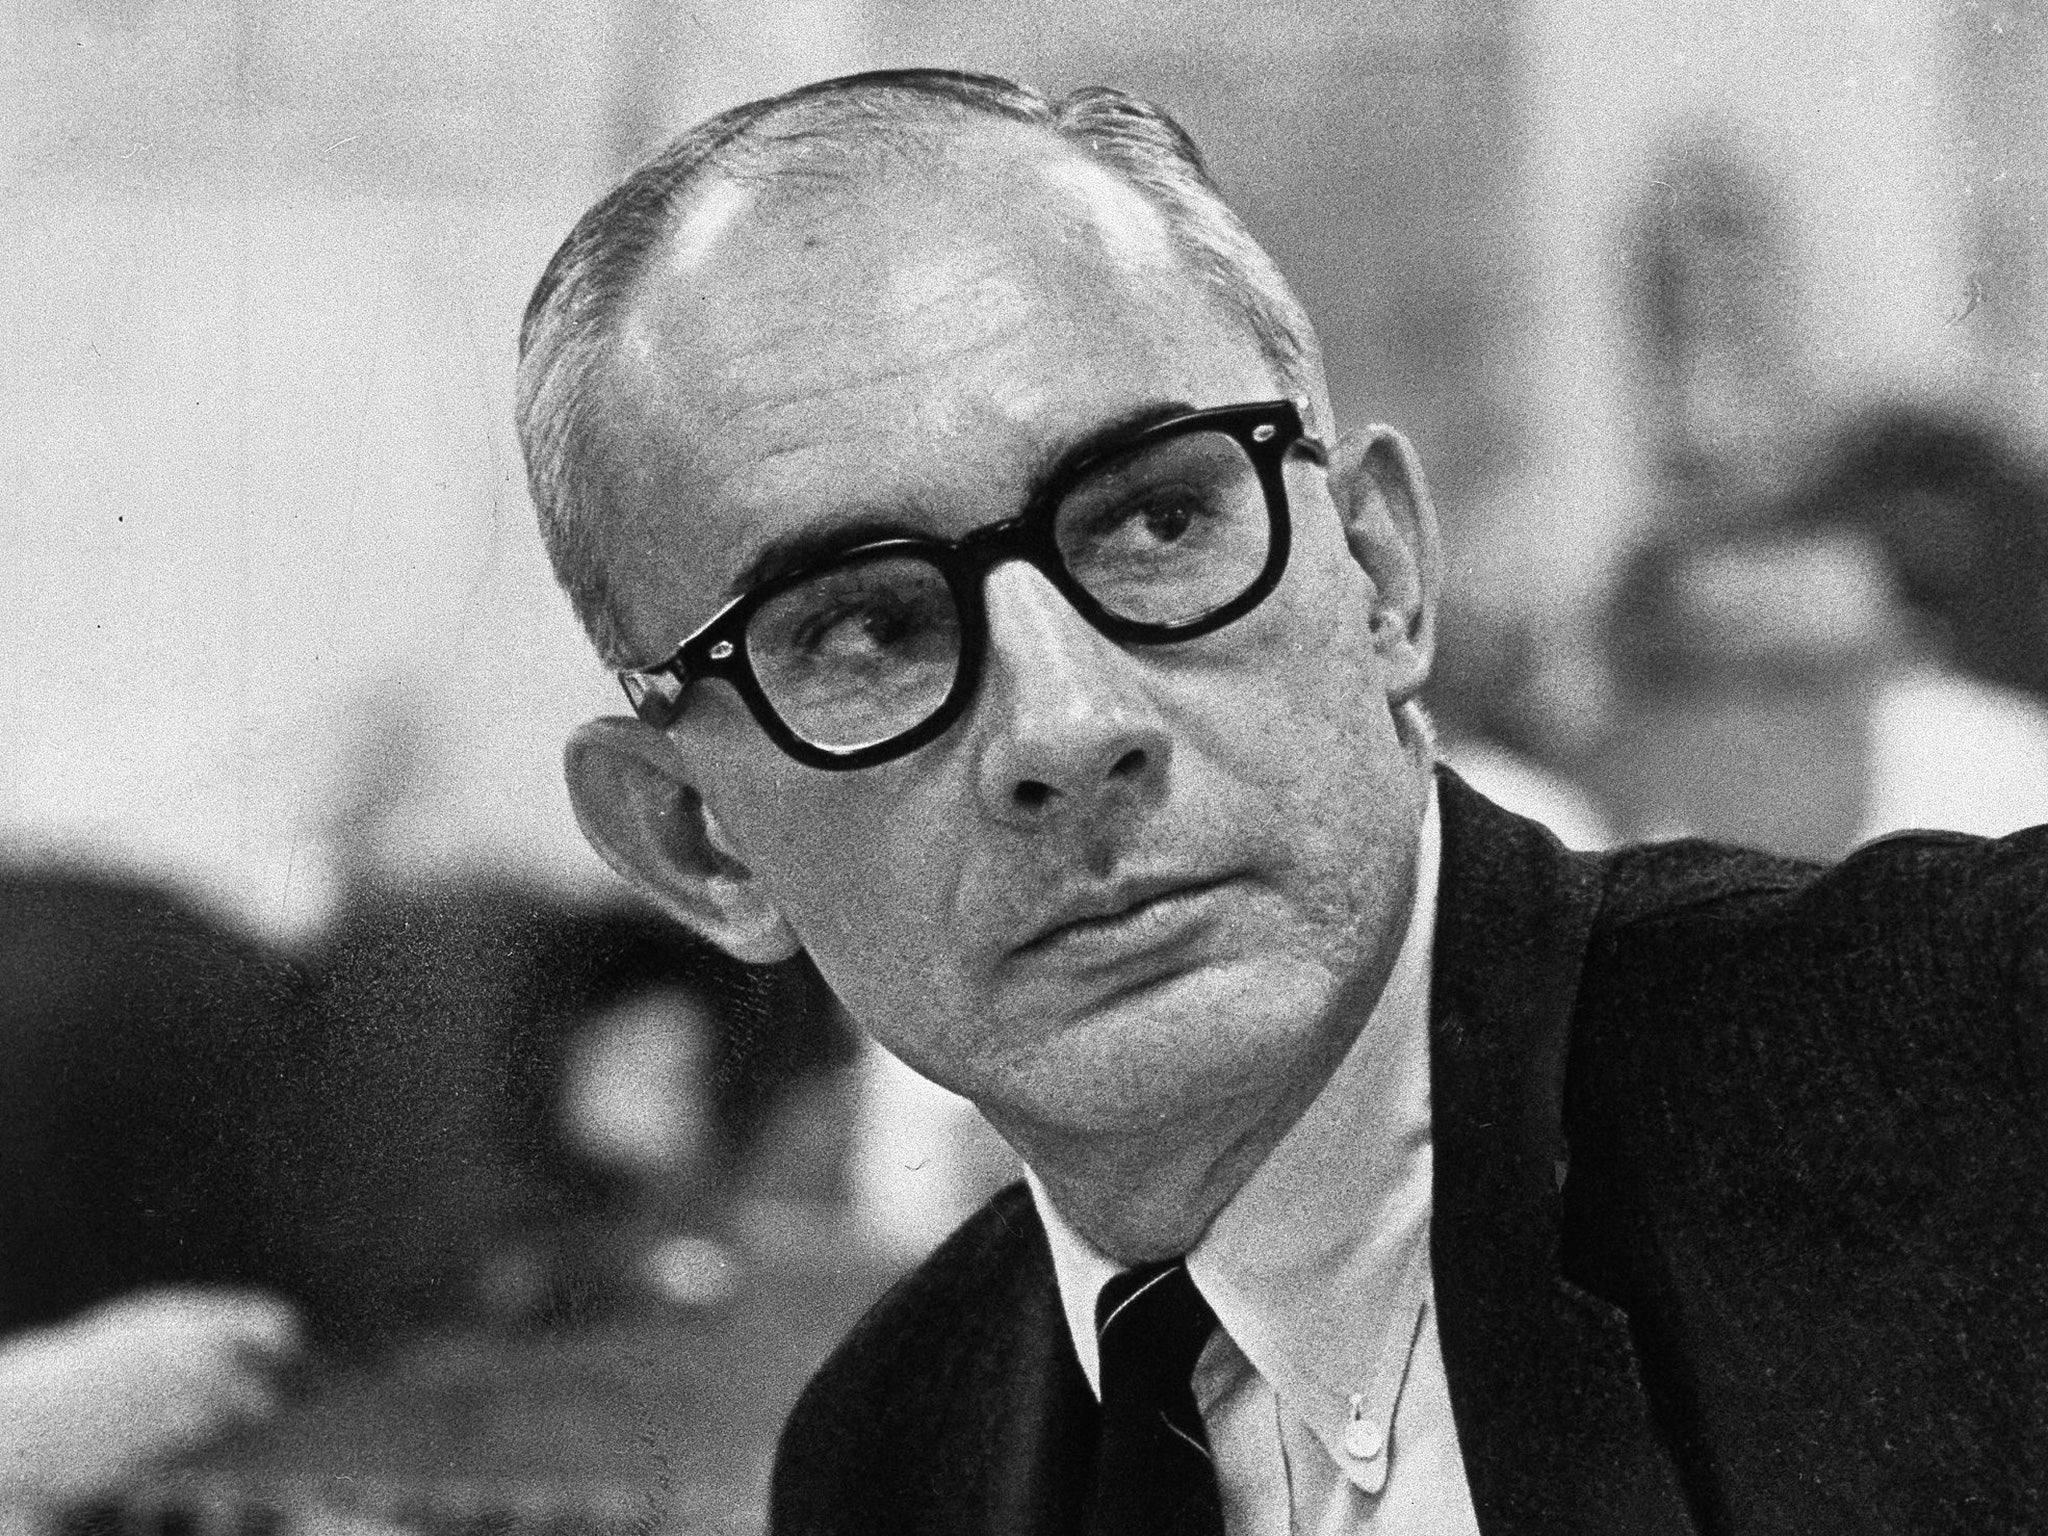 Sitton in 1965: he later won a Pulitzer Prize for his comment piece